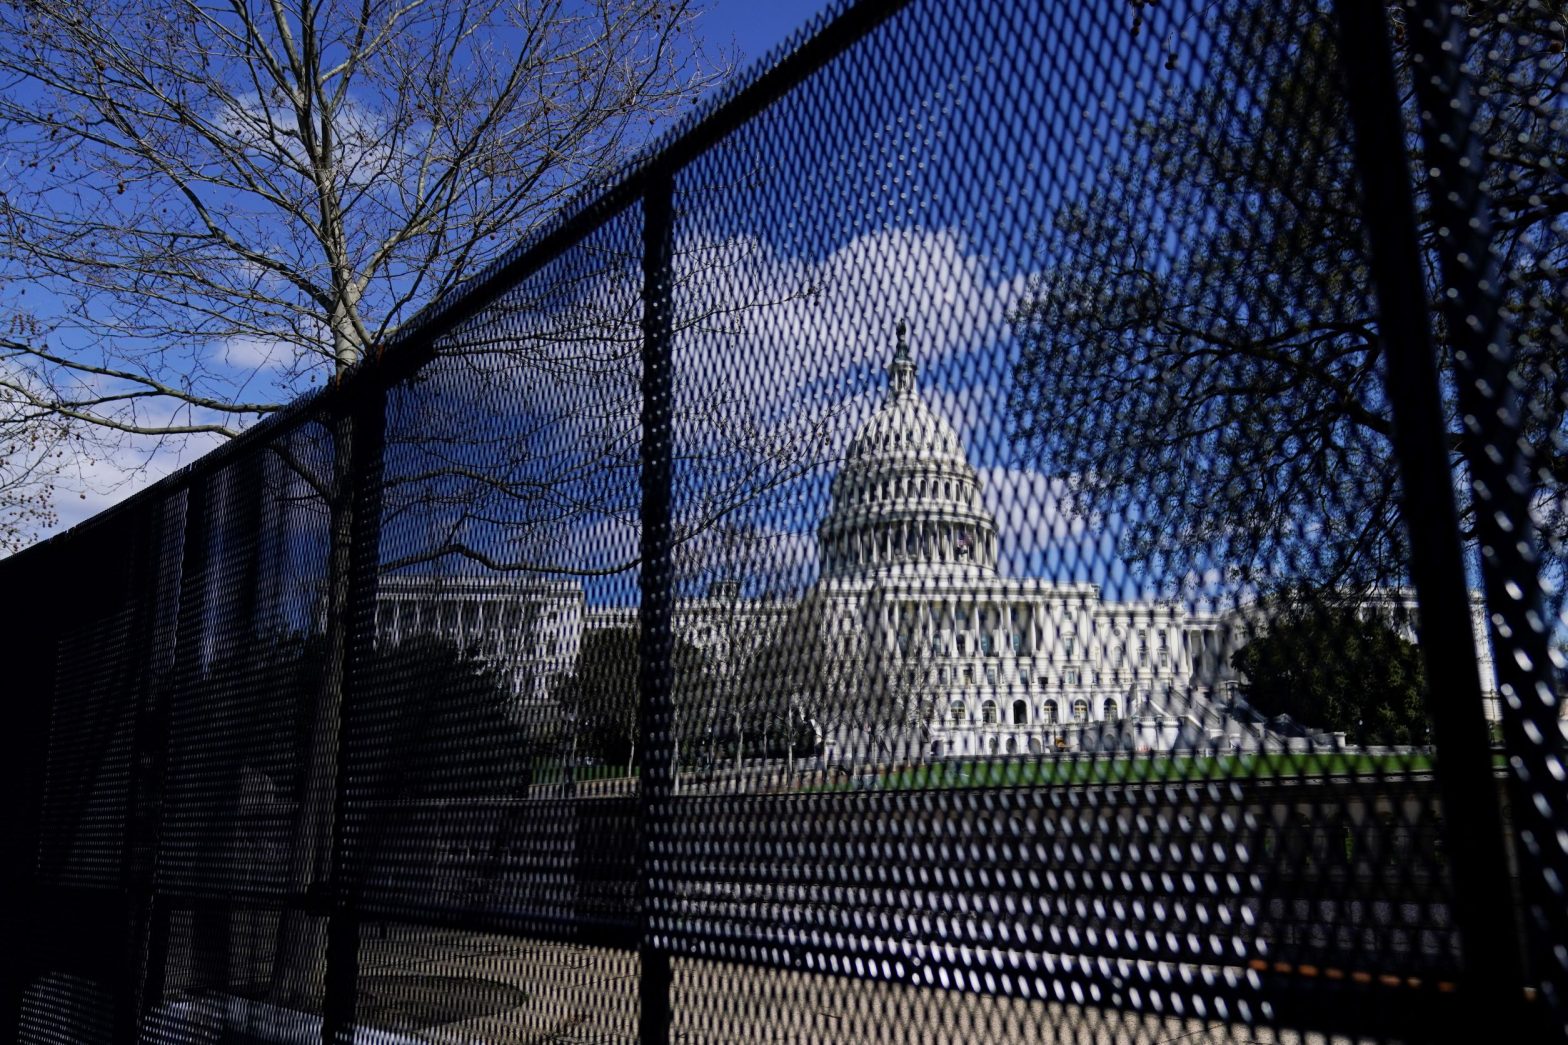 Fencing Surrounding Capitol to Return Ahead of Sept. 18 Rally